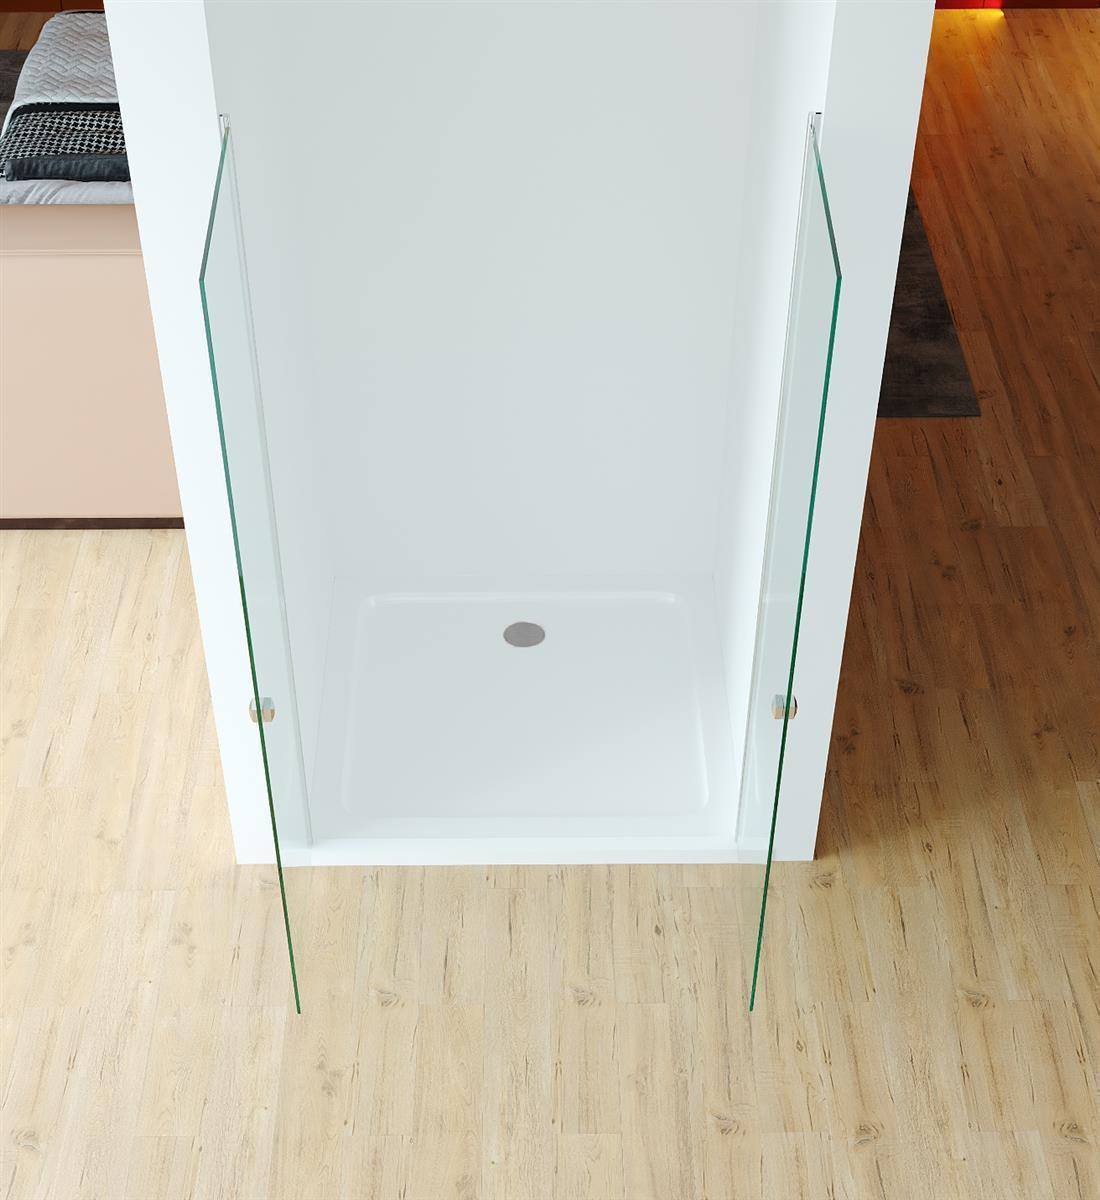 GlasHomeCenter - niche cabin California (95 x 195 cm) - 6mm toughened safety glass - without shower tray